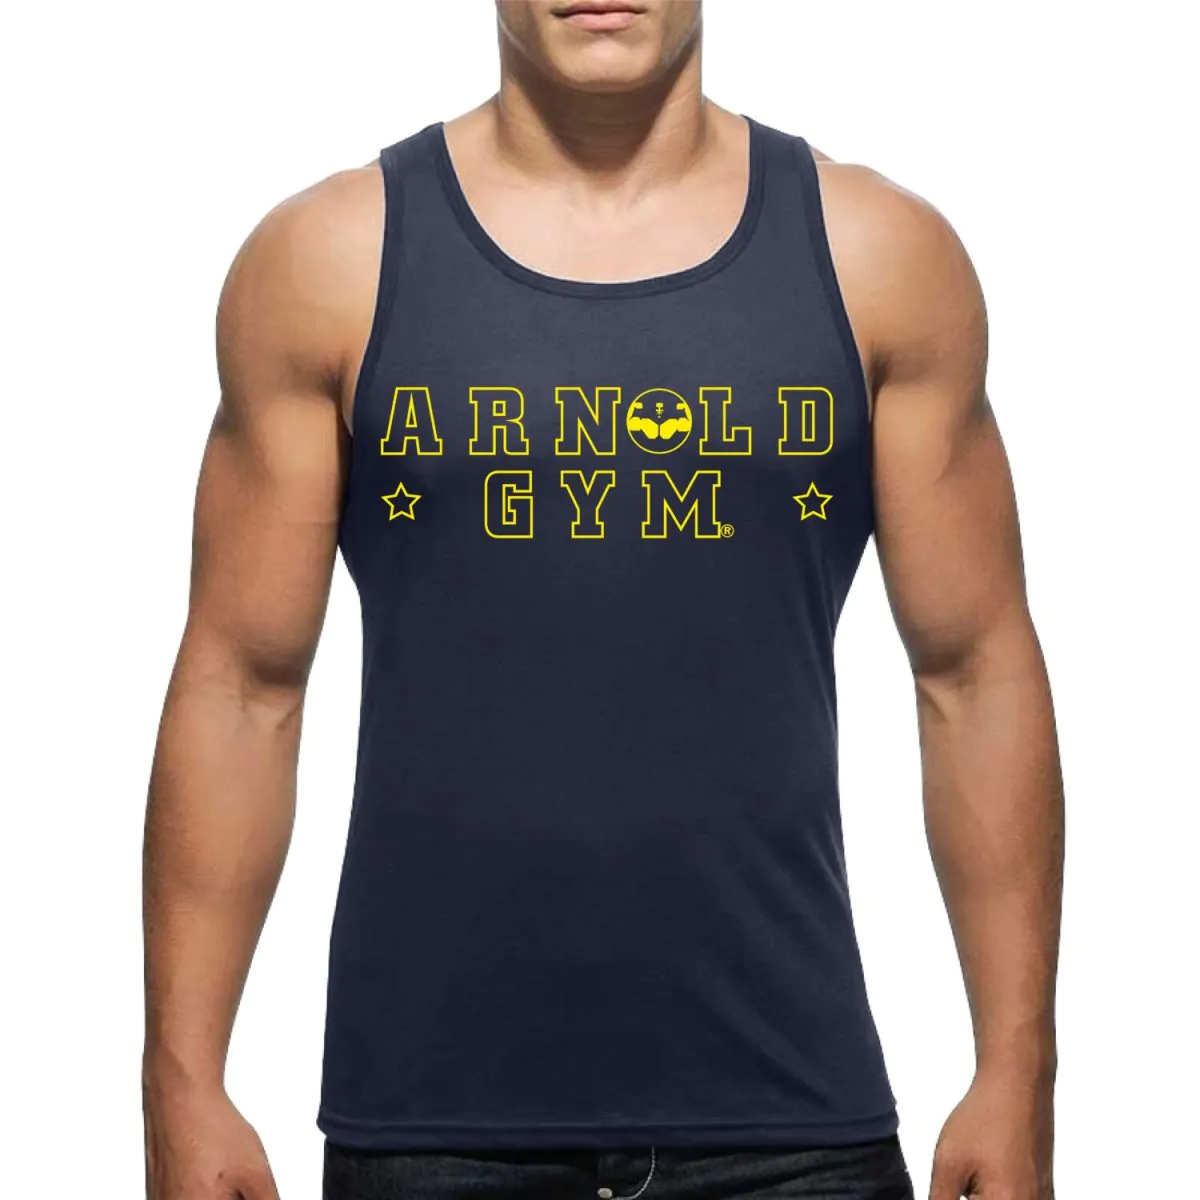 arnoldgym dry fit top basic muscle cut in dark blue